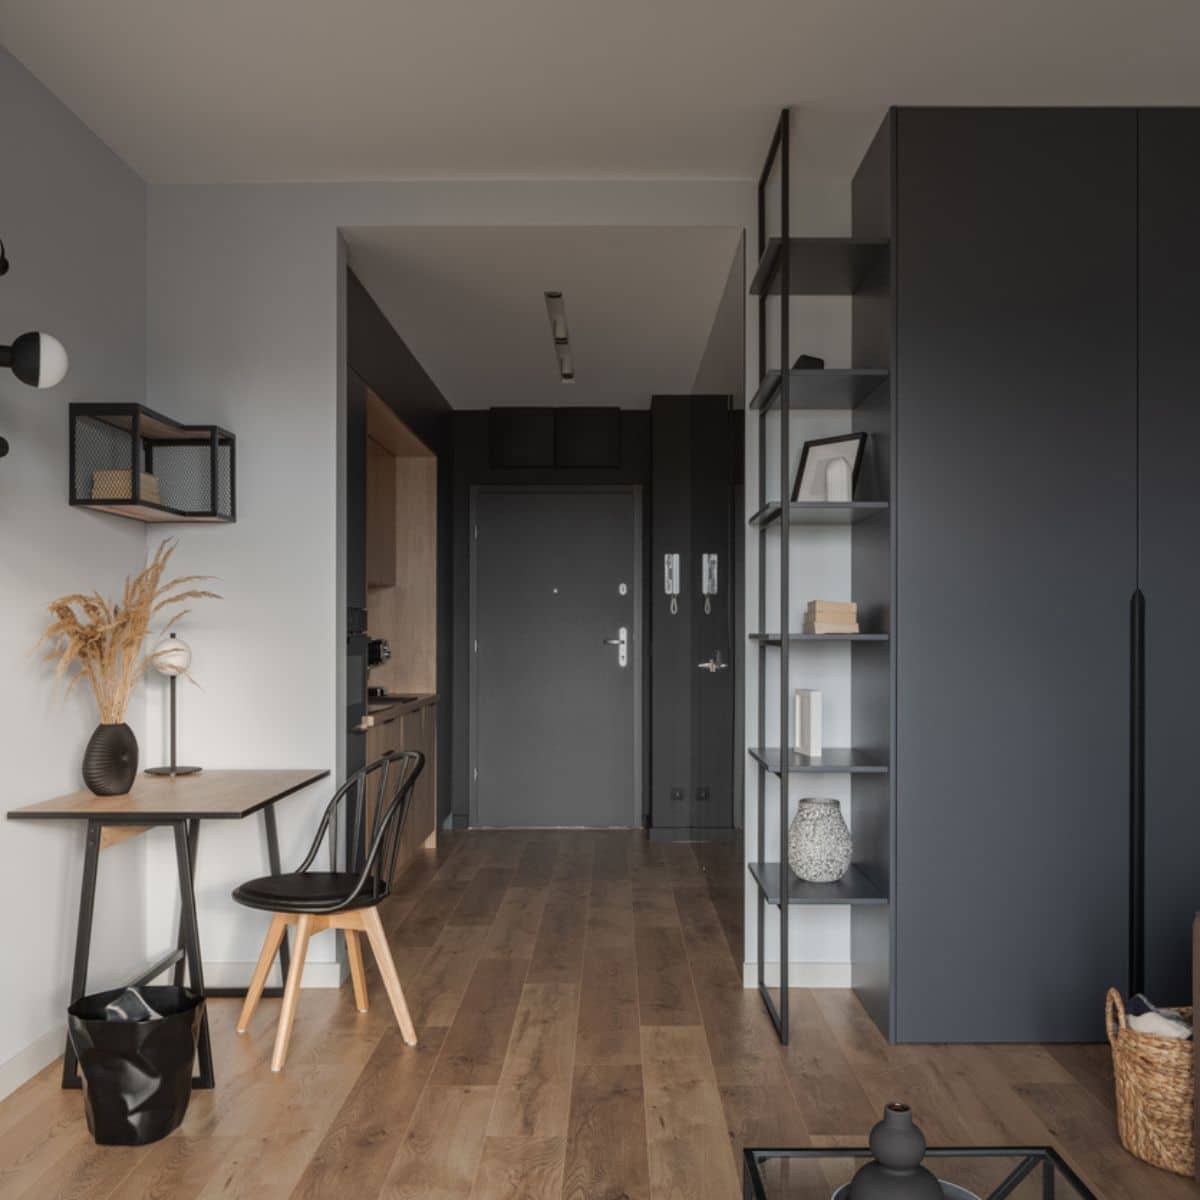 a hallway with black accents on the wall and furniture